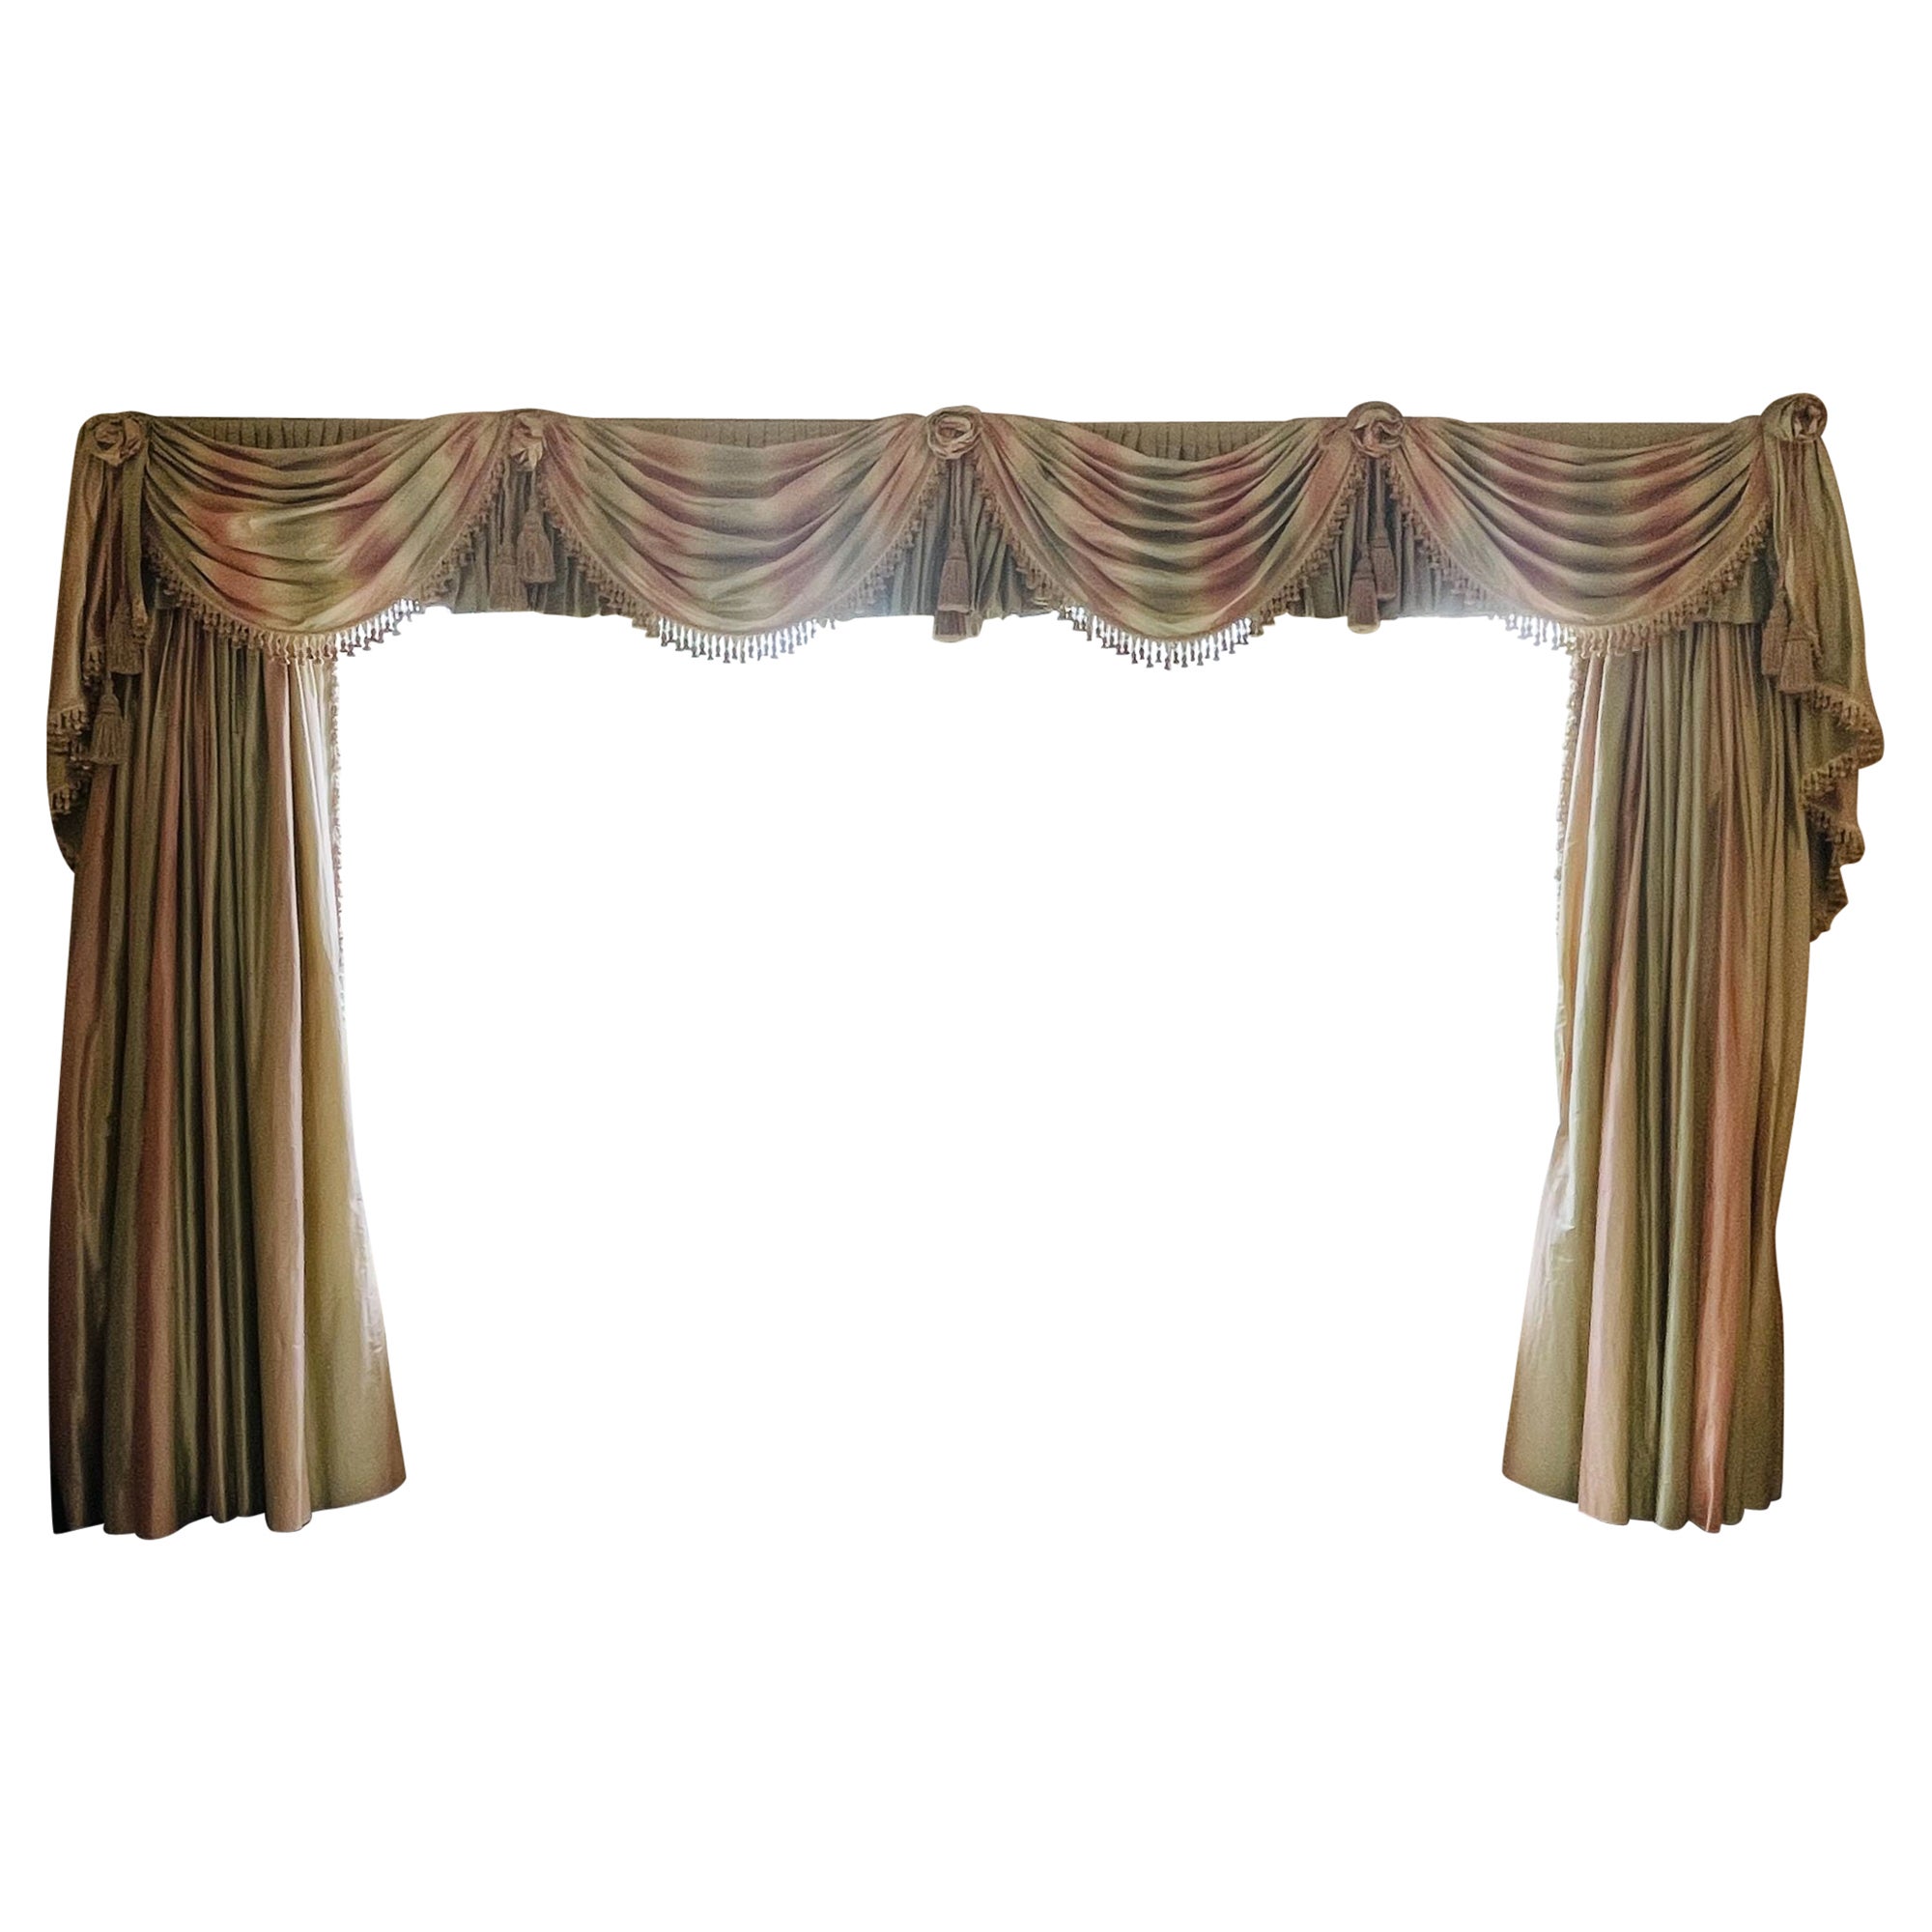 Scalamandre Window Treatments, Curtains, Drapery Rainbow Stripe, Fringed, Lined For Sale